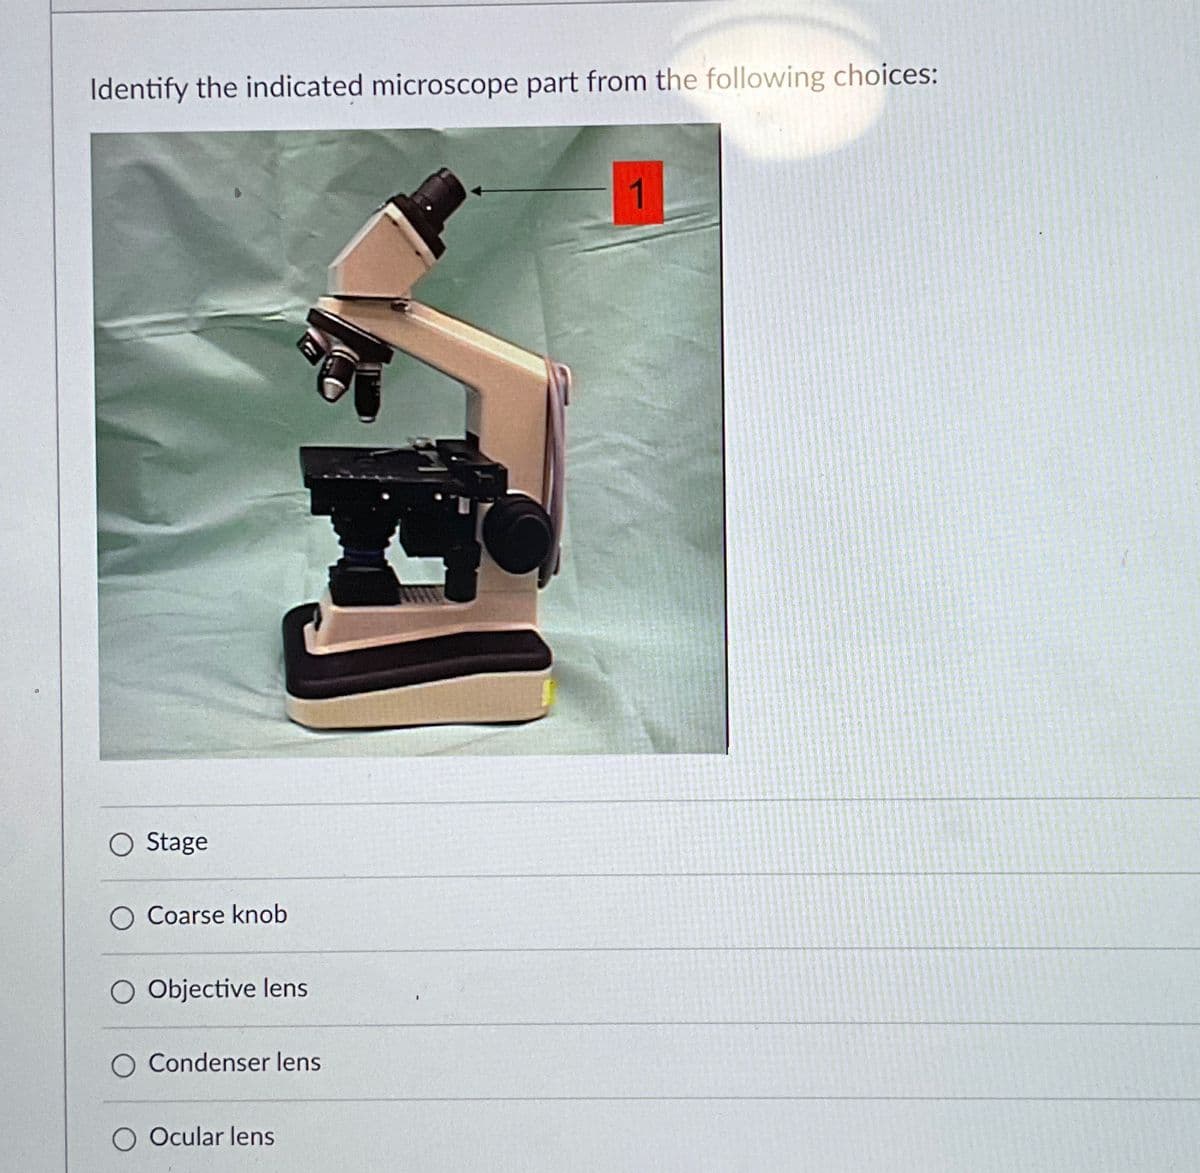 Identify the indicated microscope part from the following choices:
○ Stage
O Coarse knob
O Objective lens
Condenser lens
O Ocular lens